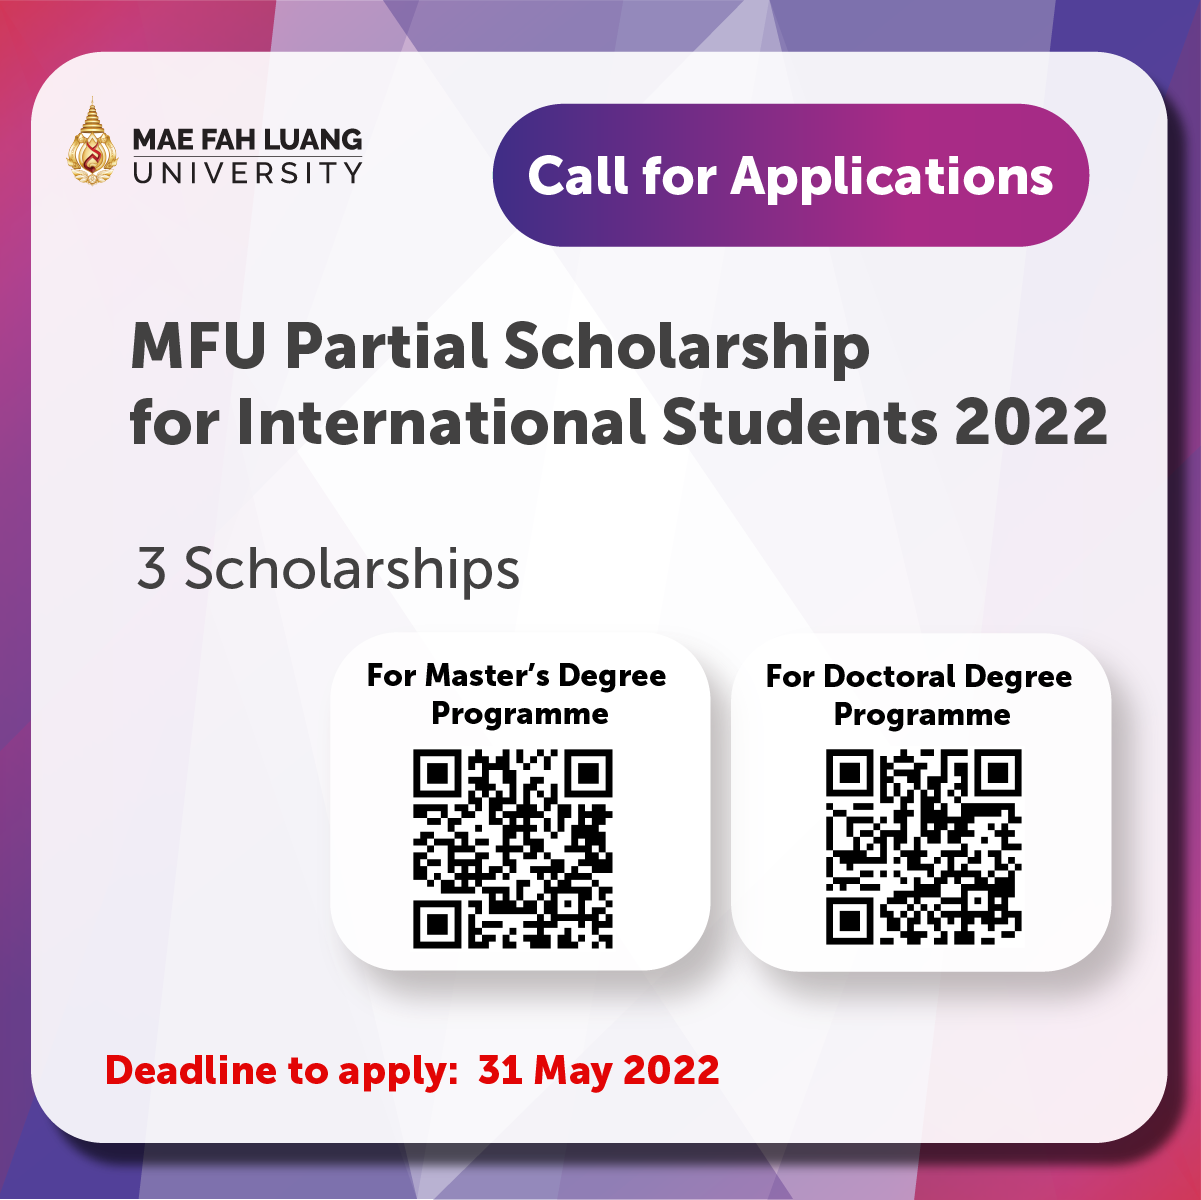 MFU Partial Scholarship for International Students 2022